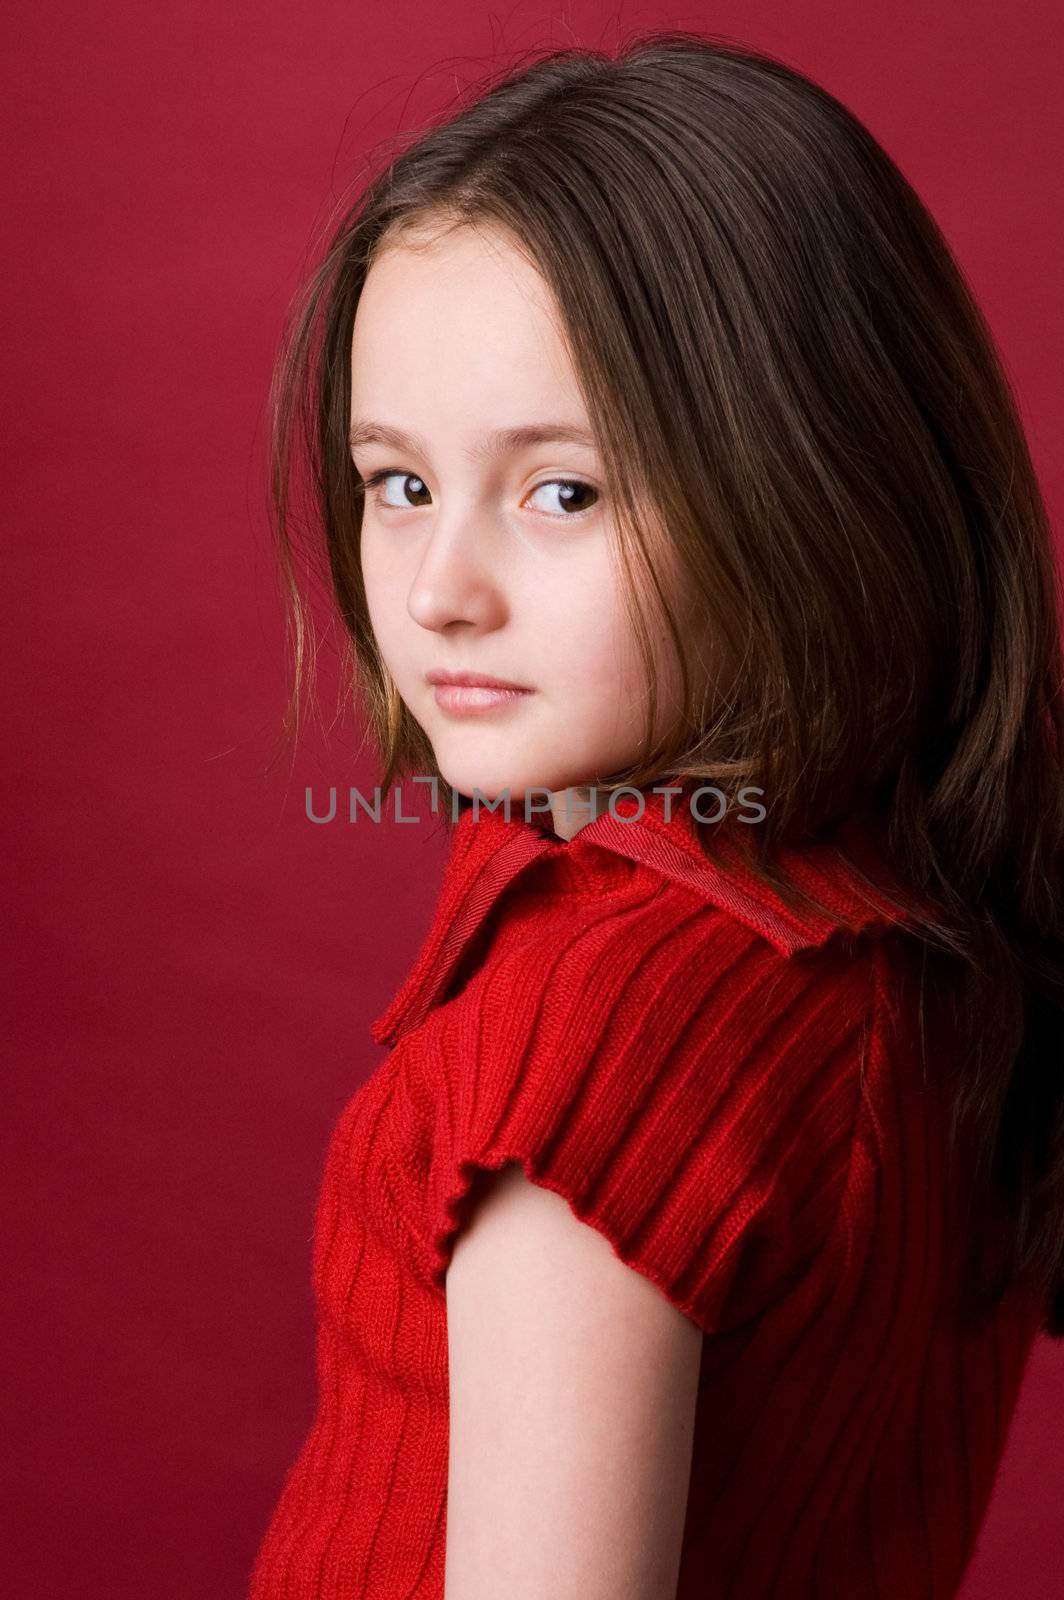 The girl in red by andyphoto